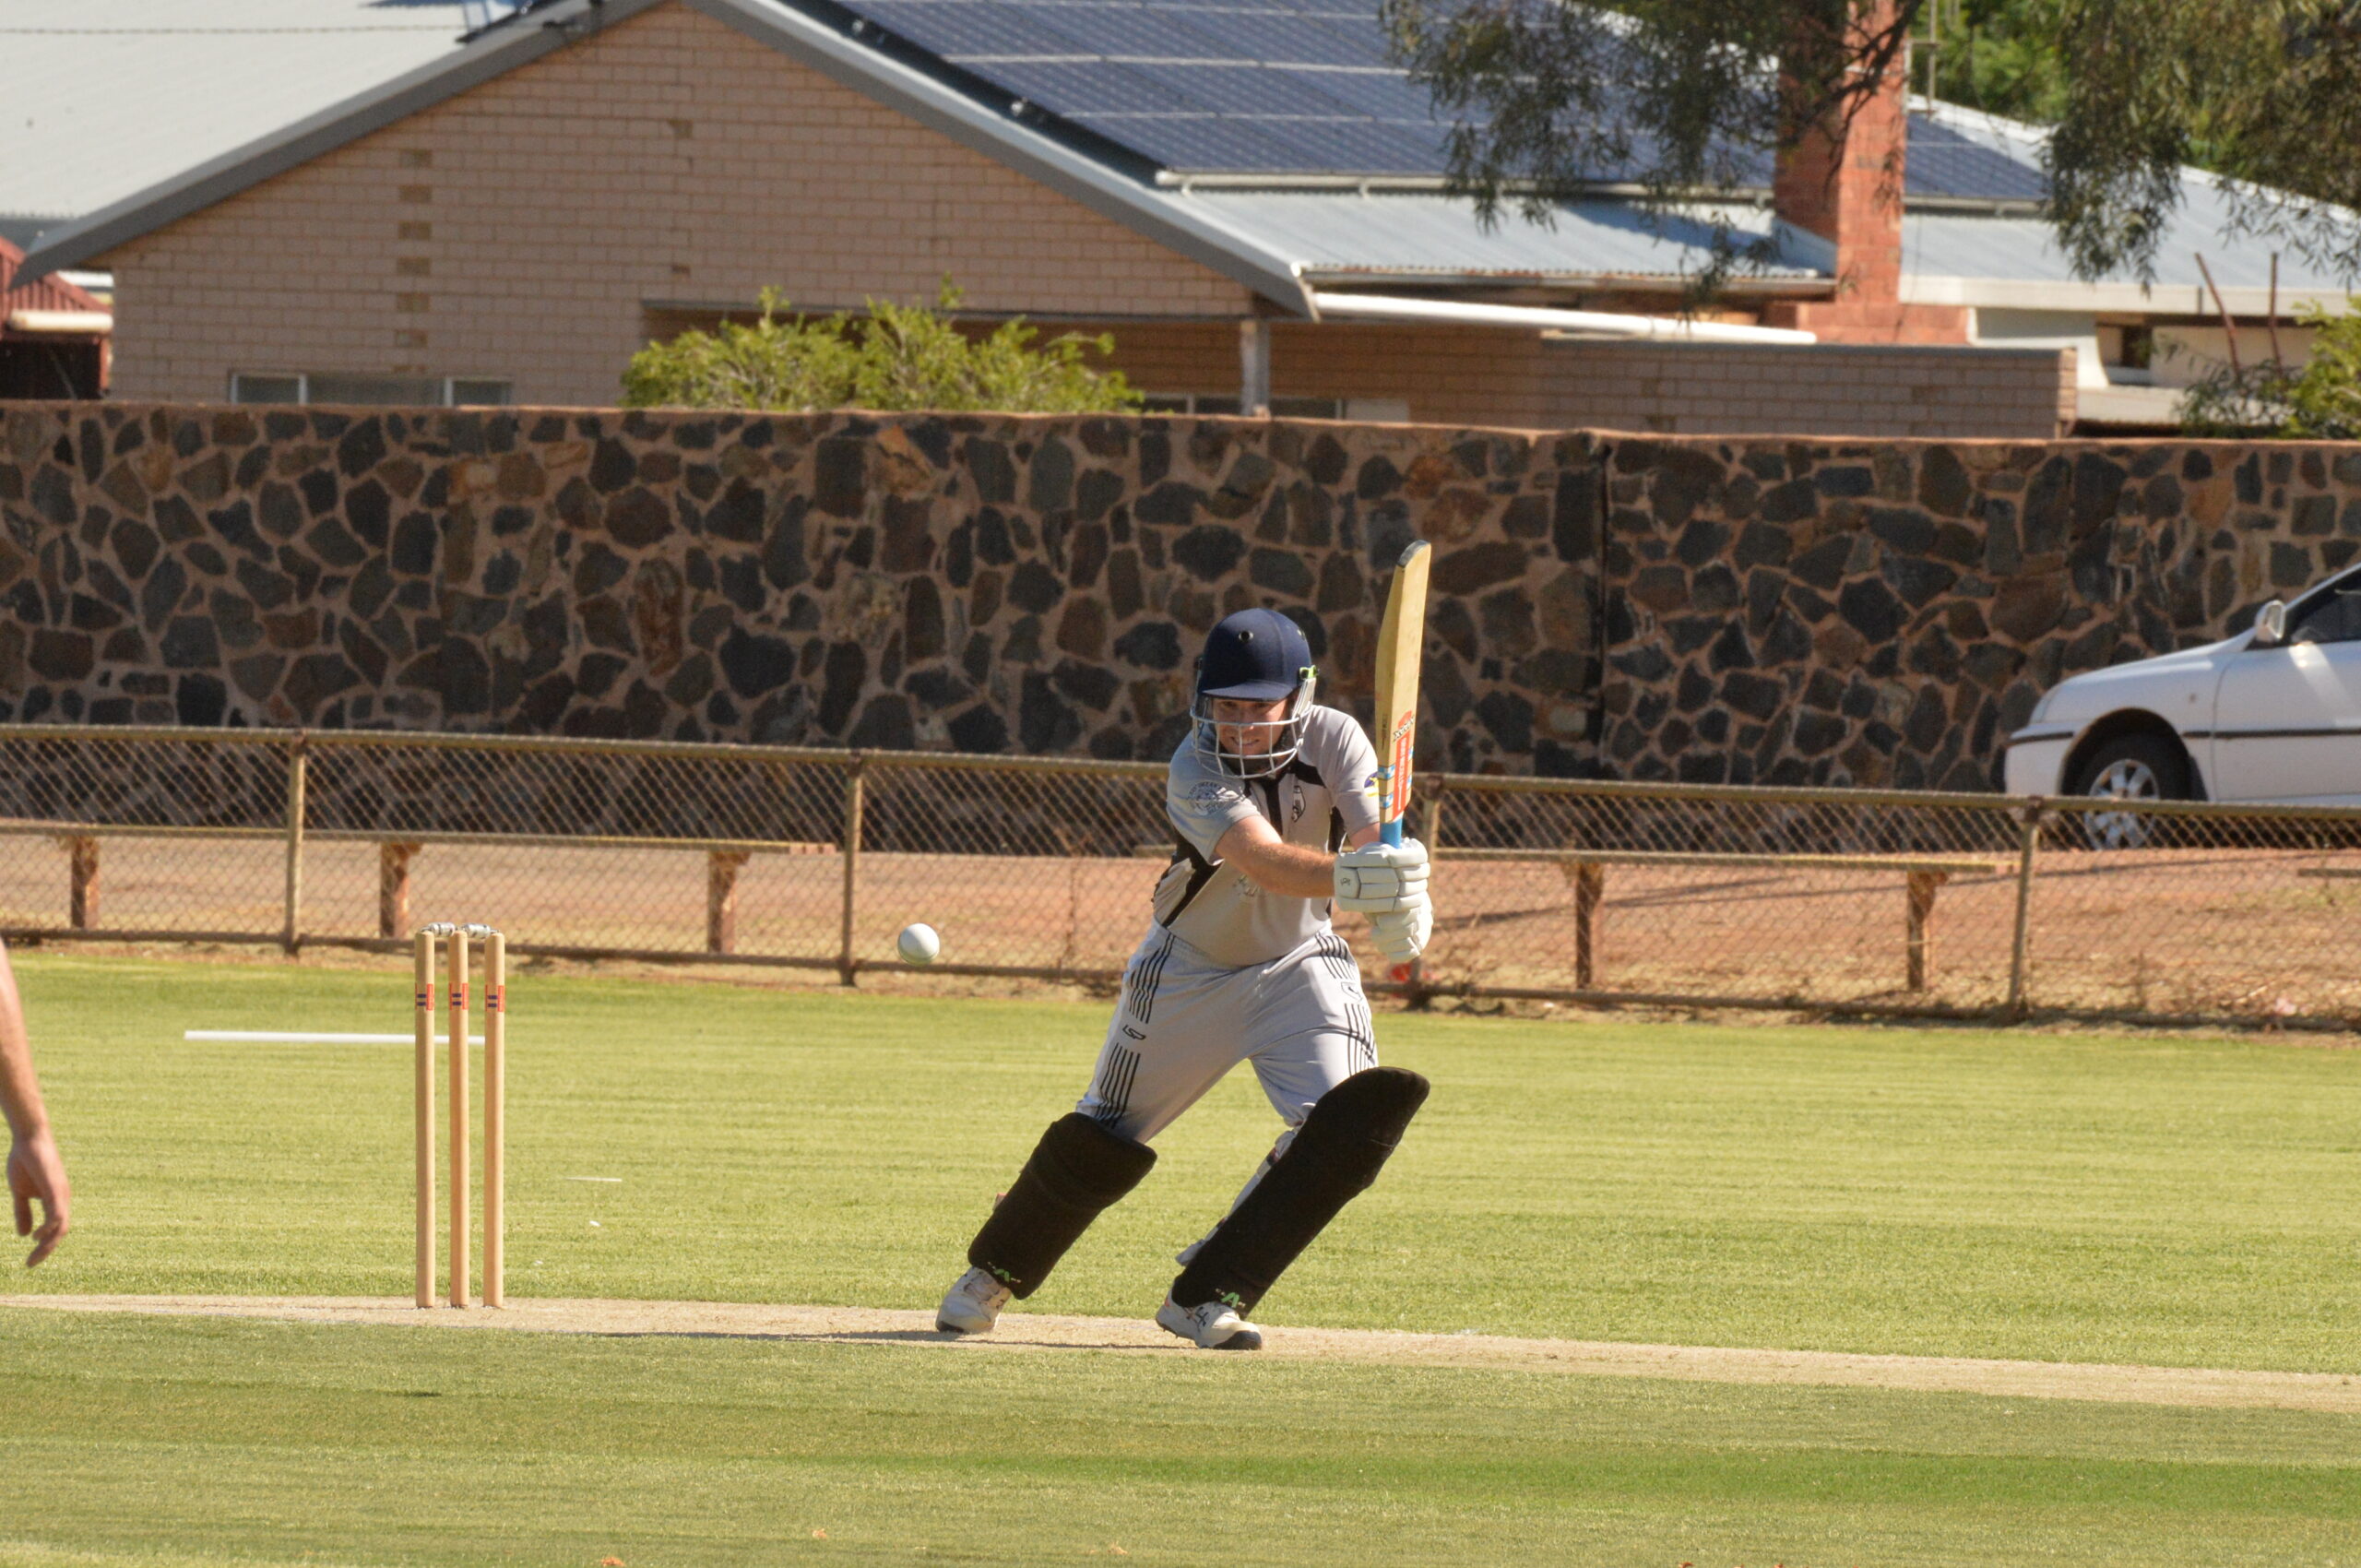 Jarred Paull of Central Cricket Club